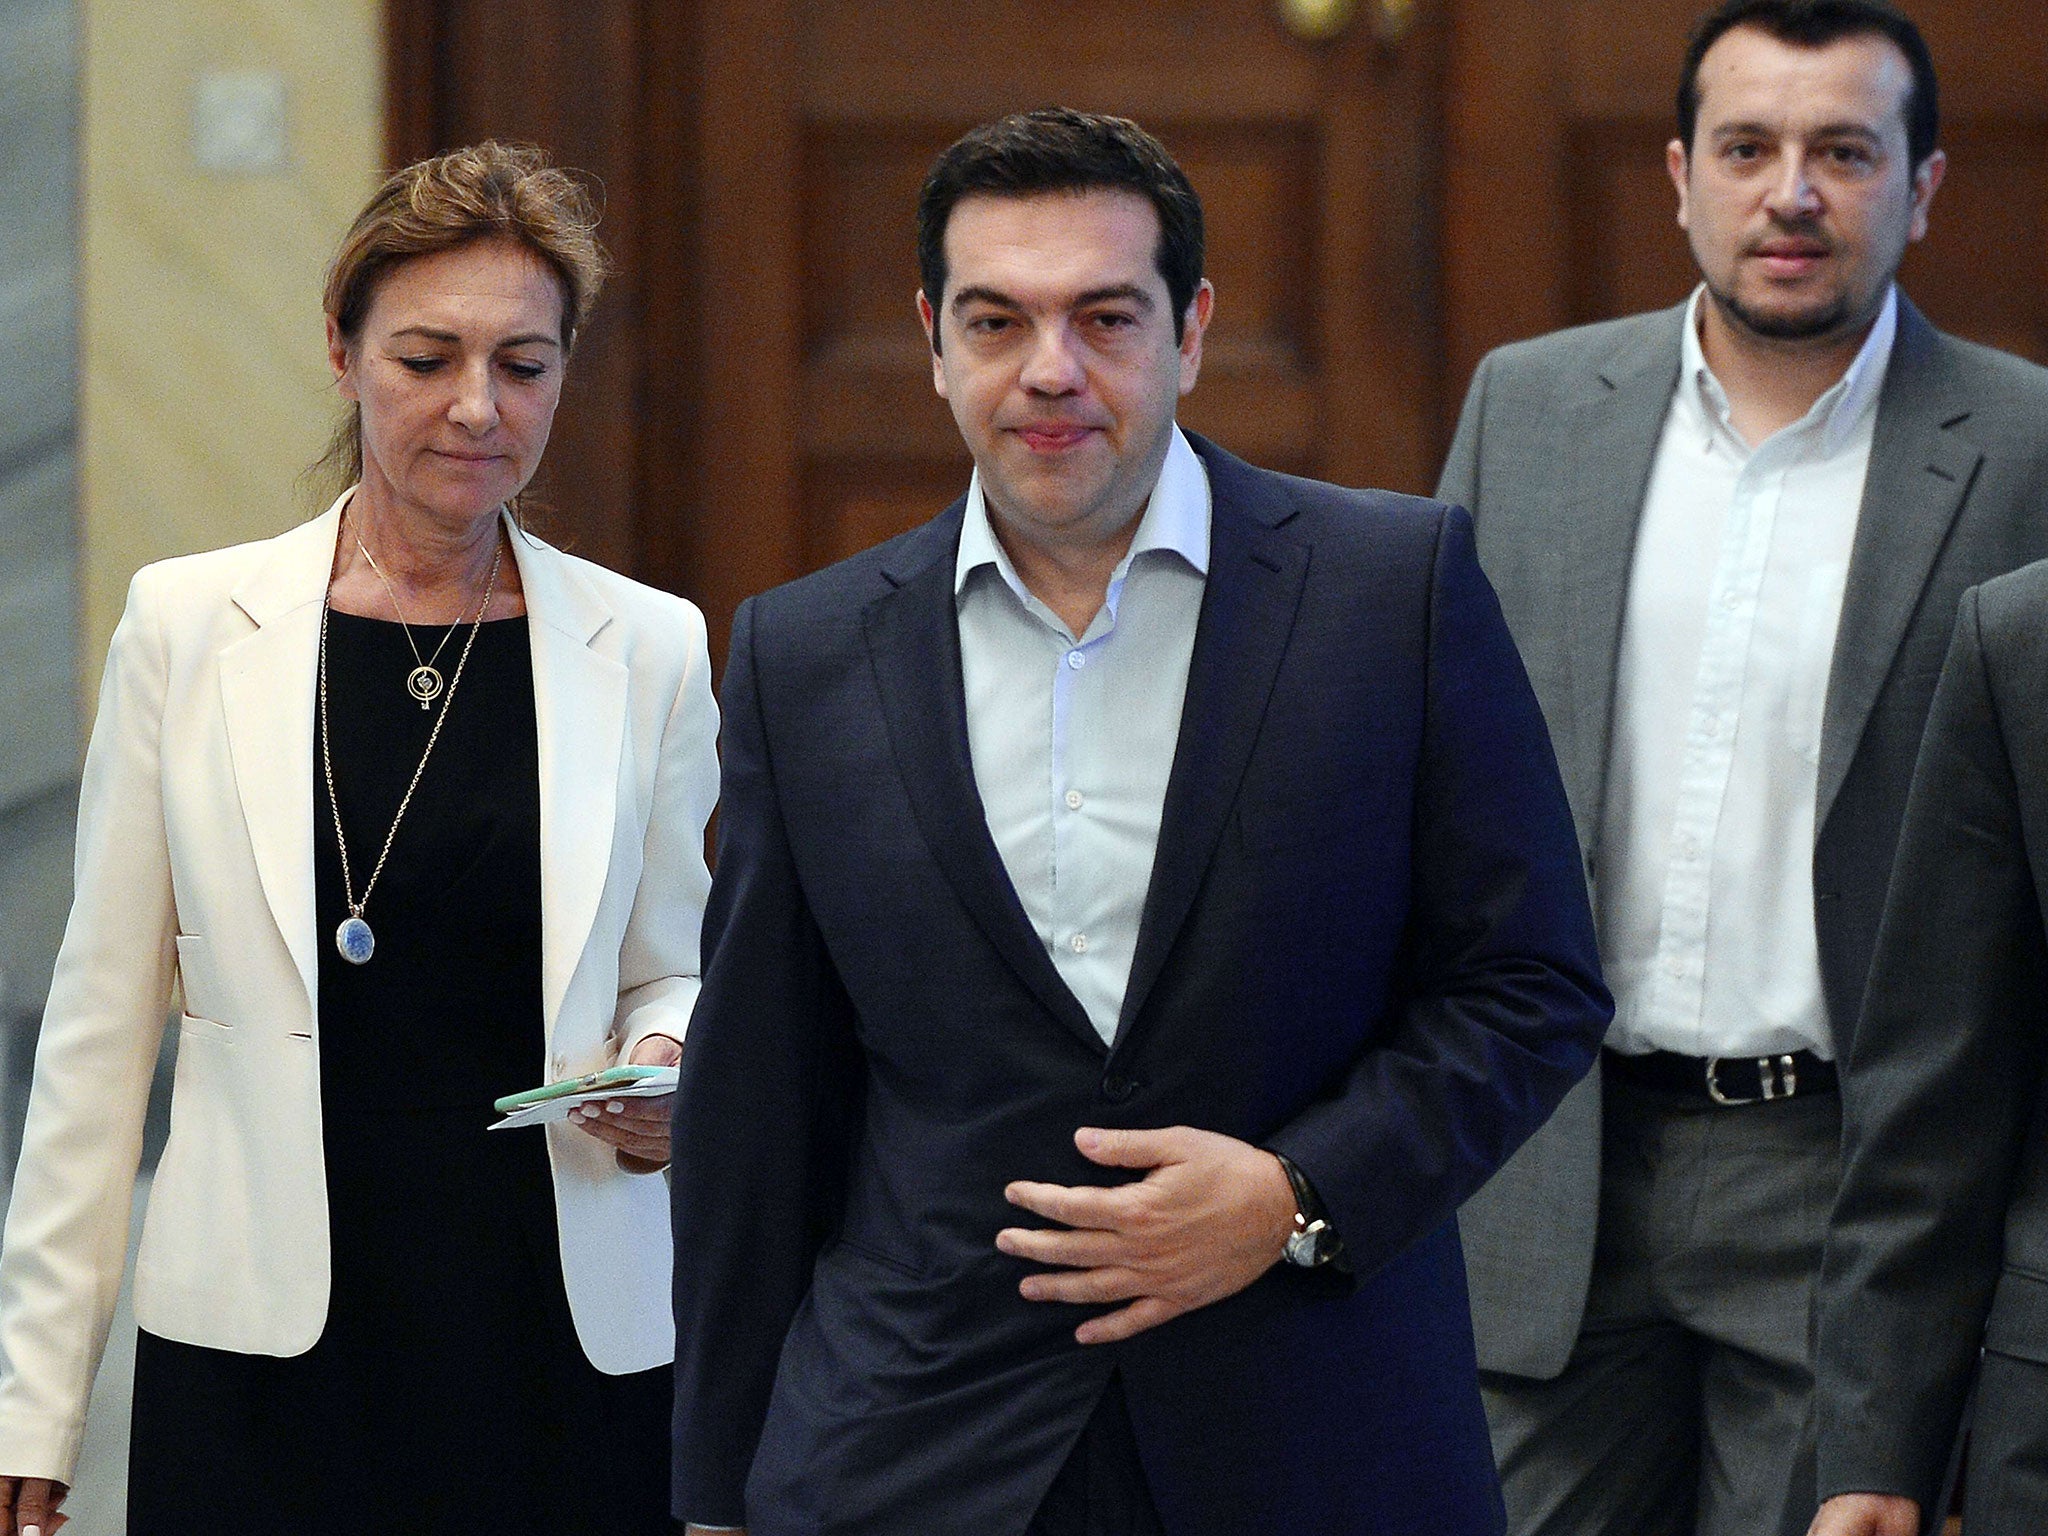 Greek Prime Minister Alexis Tsipras arrives for his meeting with the Greek political leader and the Greek President at the presidental palace in Athens